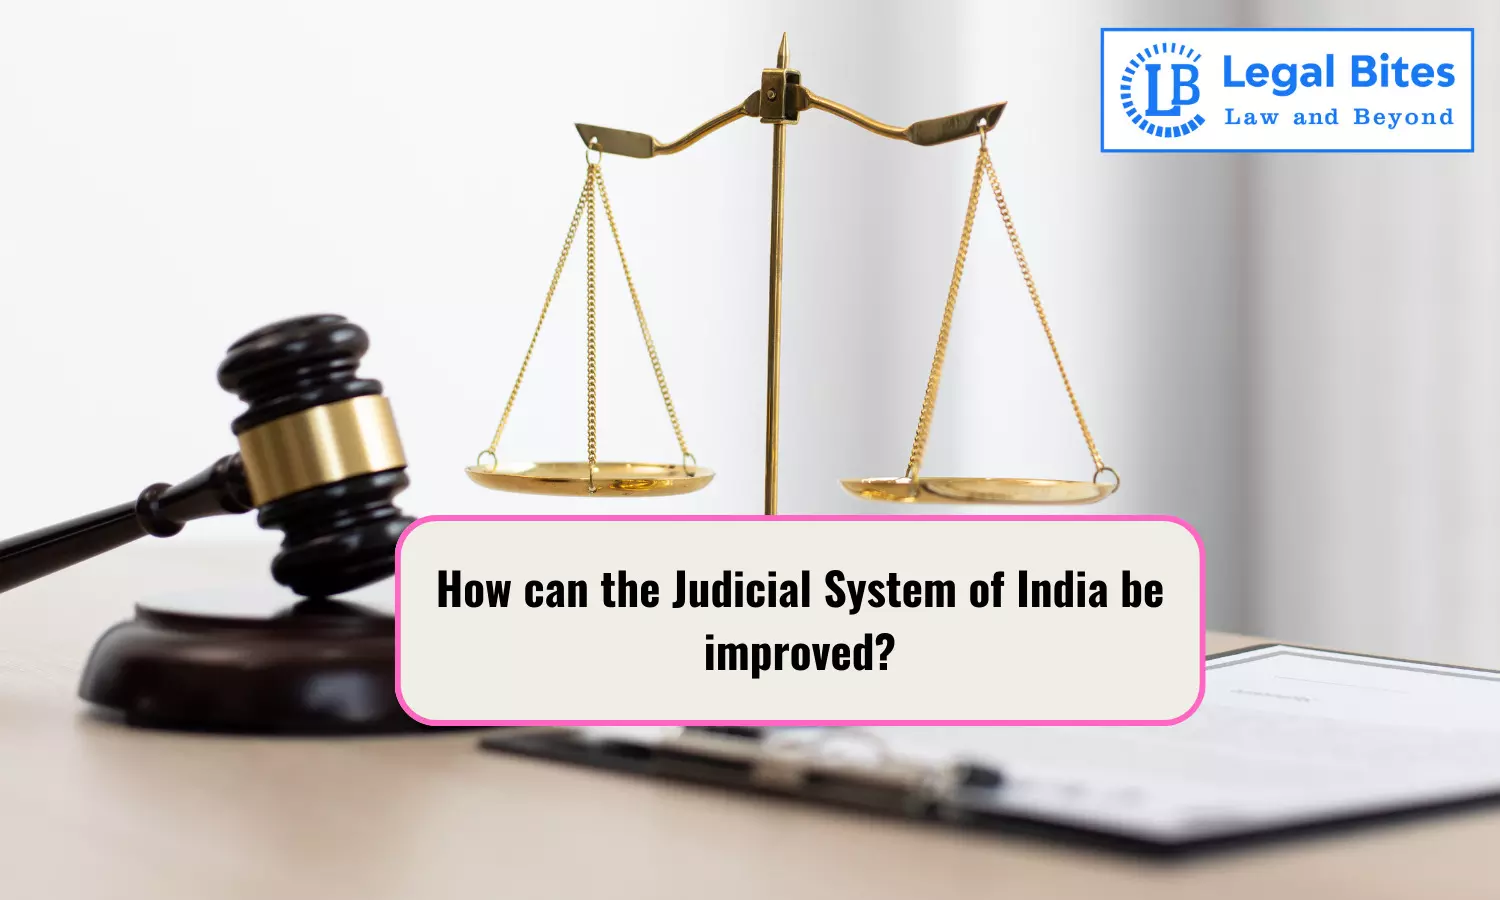 How can the judicial system of India be improved?